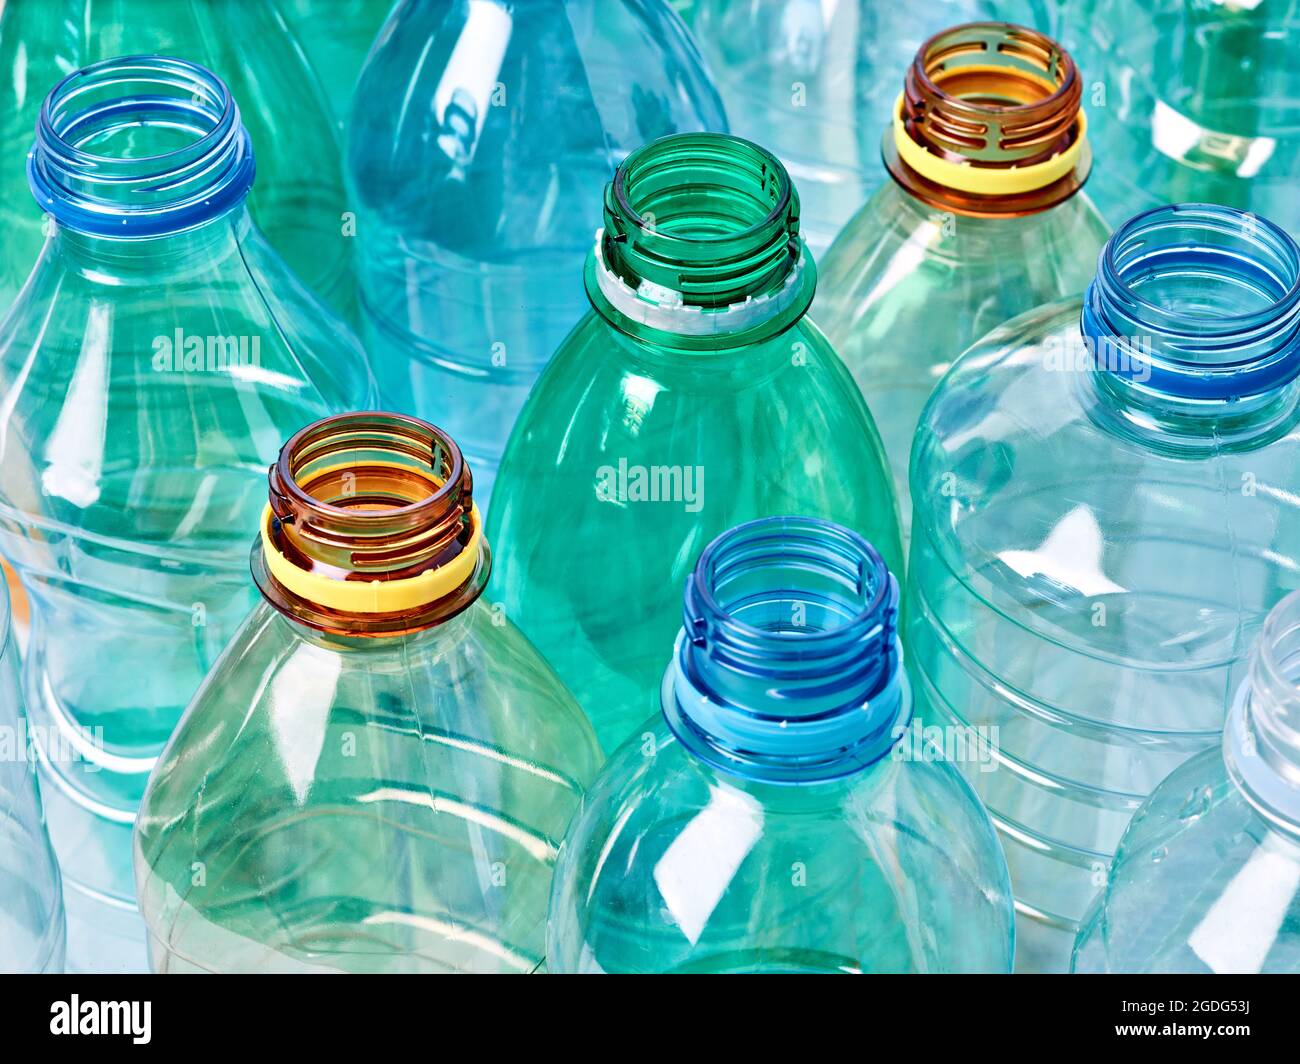 How Does Recycling Water Bottles Help the Environment?